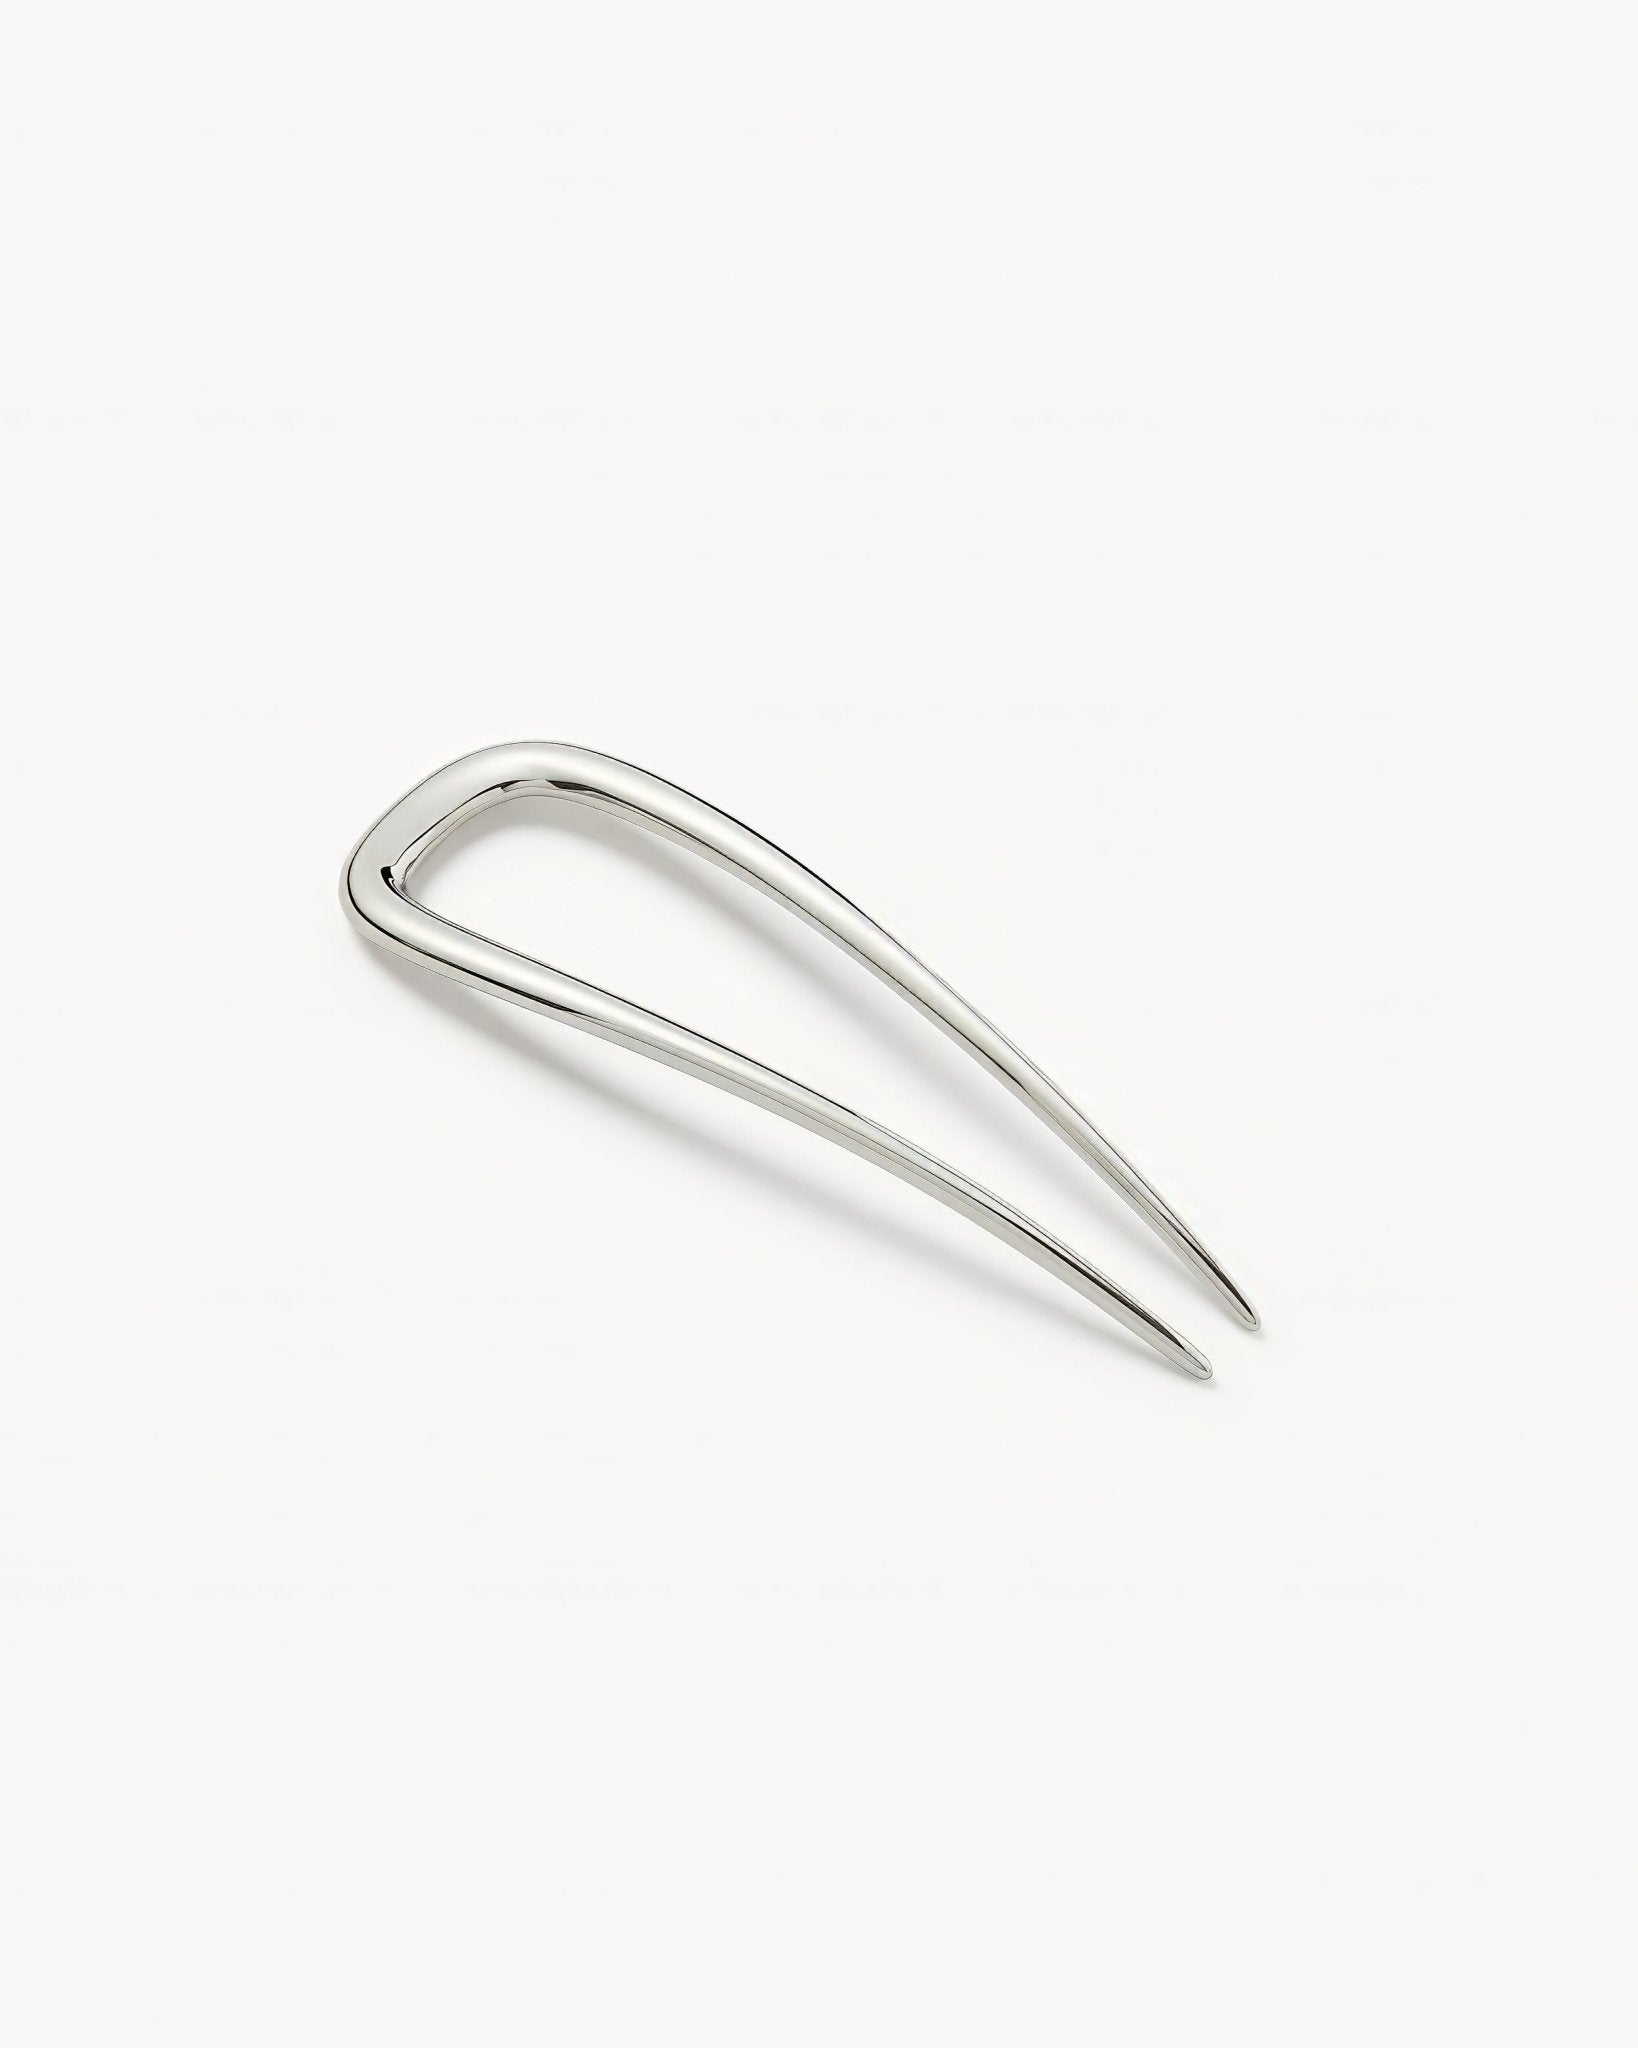 Petite Oval French Hair Pin in Silver 